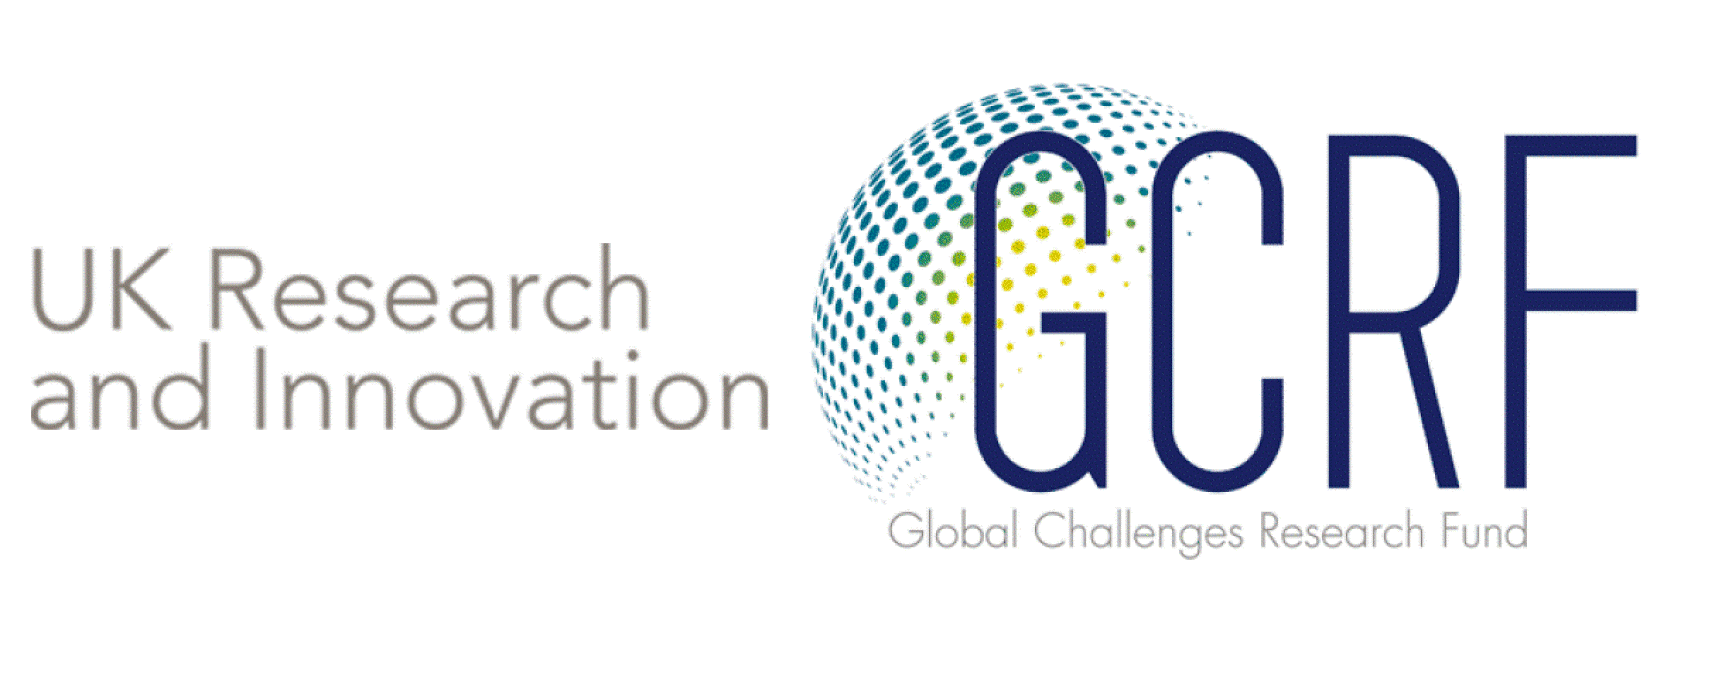 GCRF-Research-council-logos-side-by-sideV2.gif